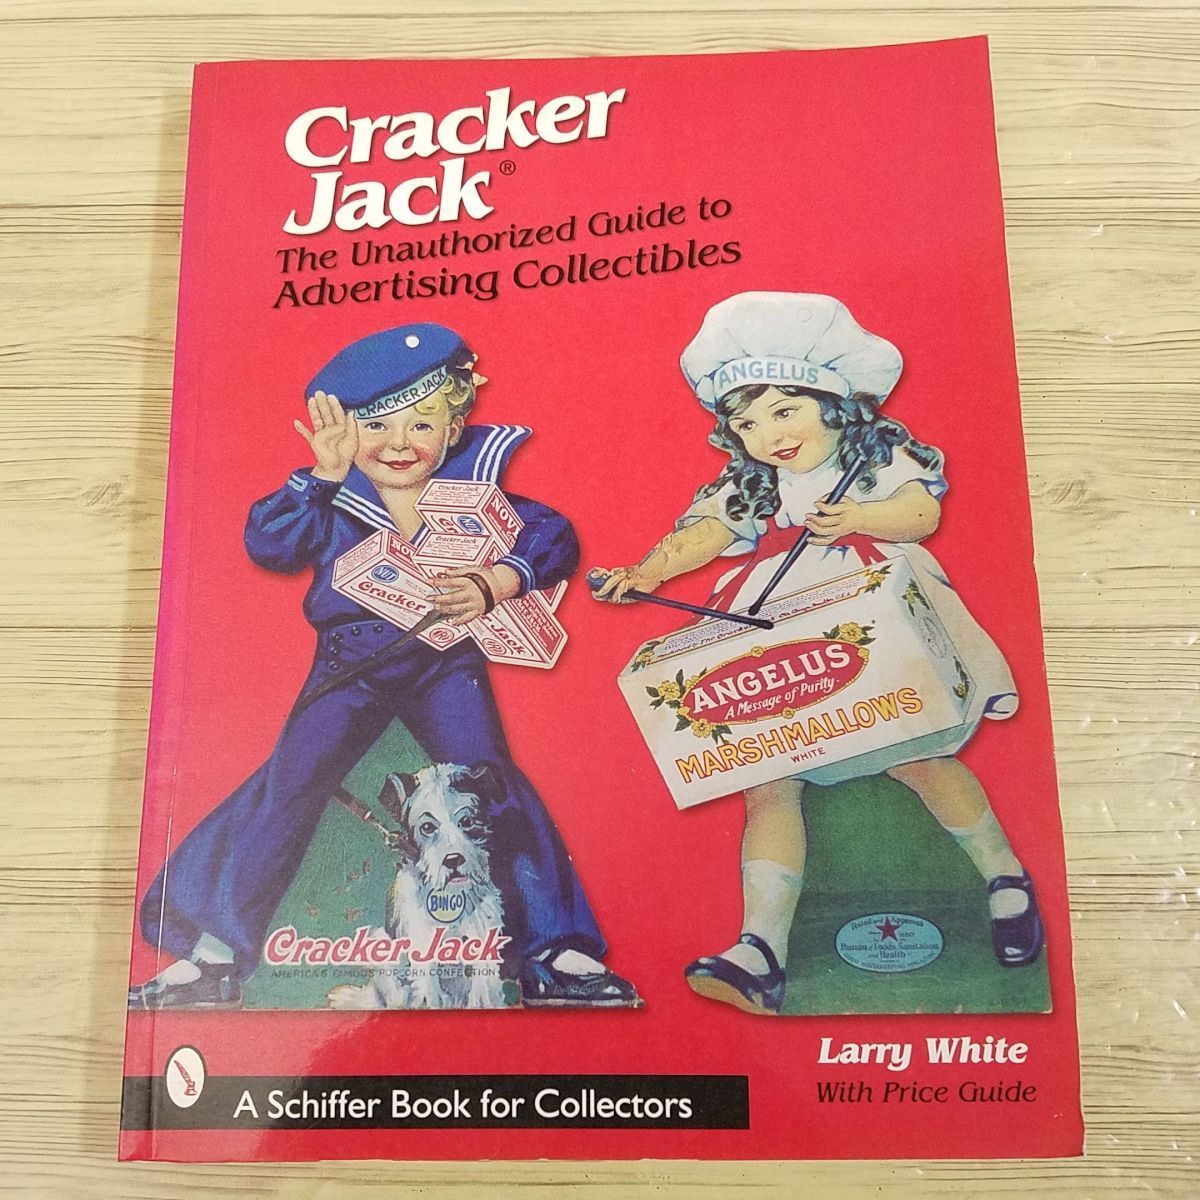  book of paintings in print [ cracker * Jack Cracker Jack : The Unauthorized Guide to Advertising Collectibles] foreign book English large book